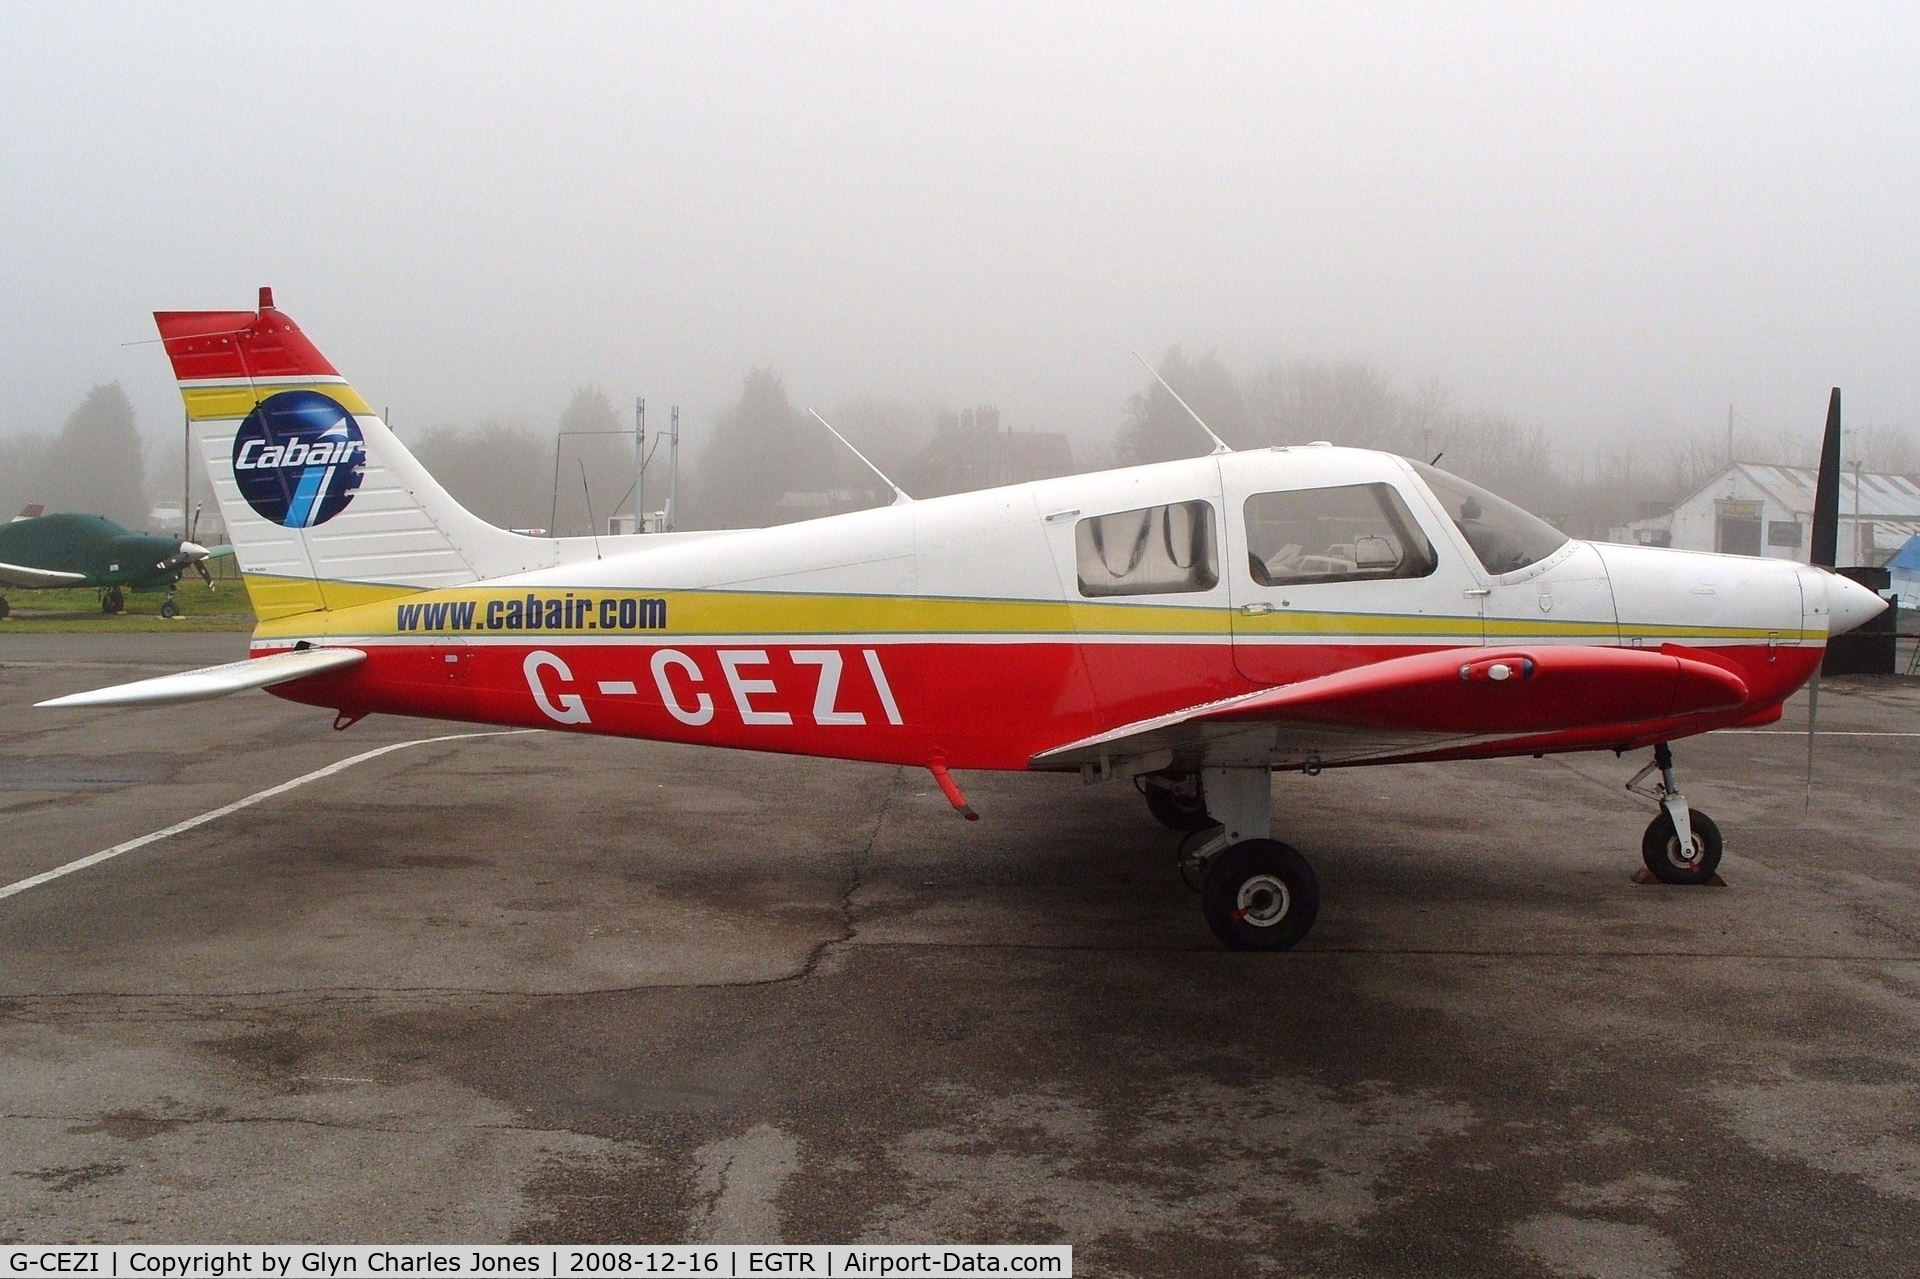 G-CEZI, 1989 Piper PA-28-161 Cadet C/N 2841228, Taken on a quiet cold and foggy day. With thanks to Elstree control tower who granted me authority to take photographs on the aerodrome. Previously N131ND. Operated by Cabair.